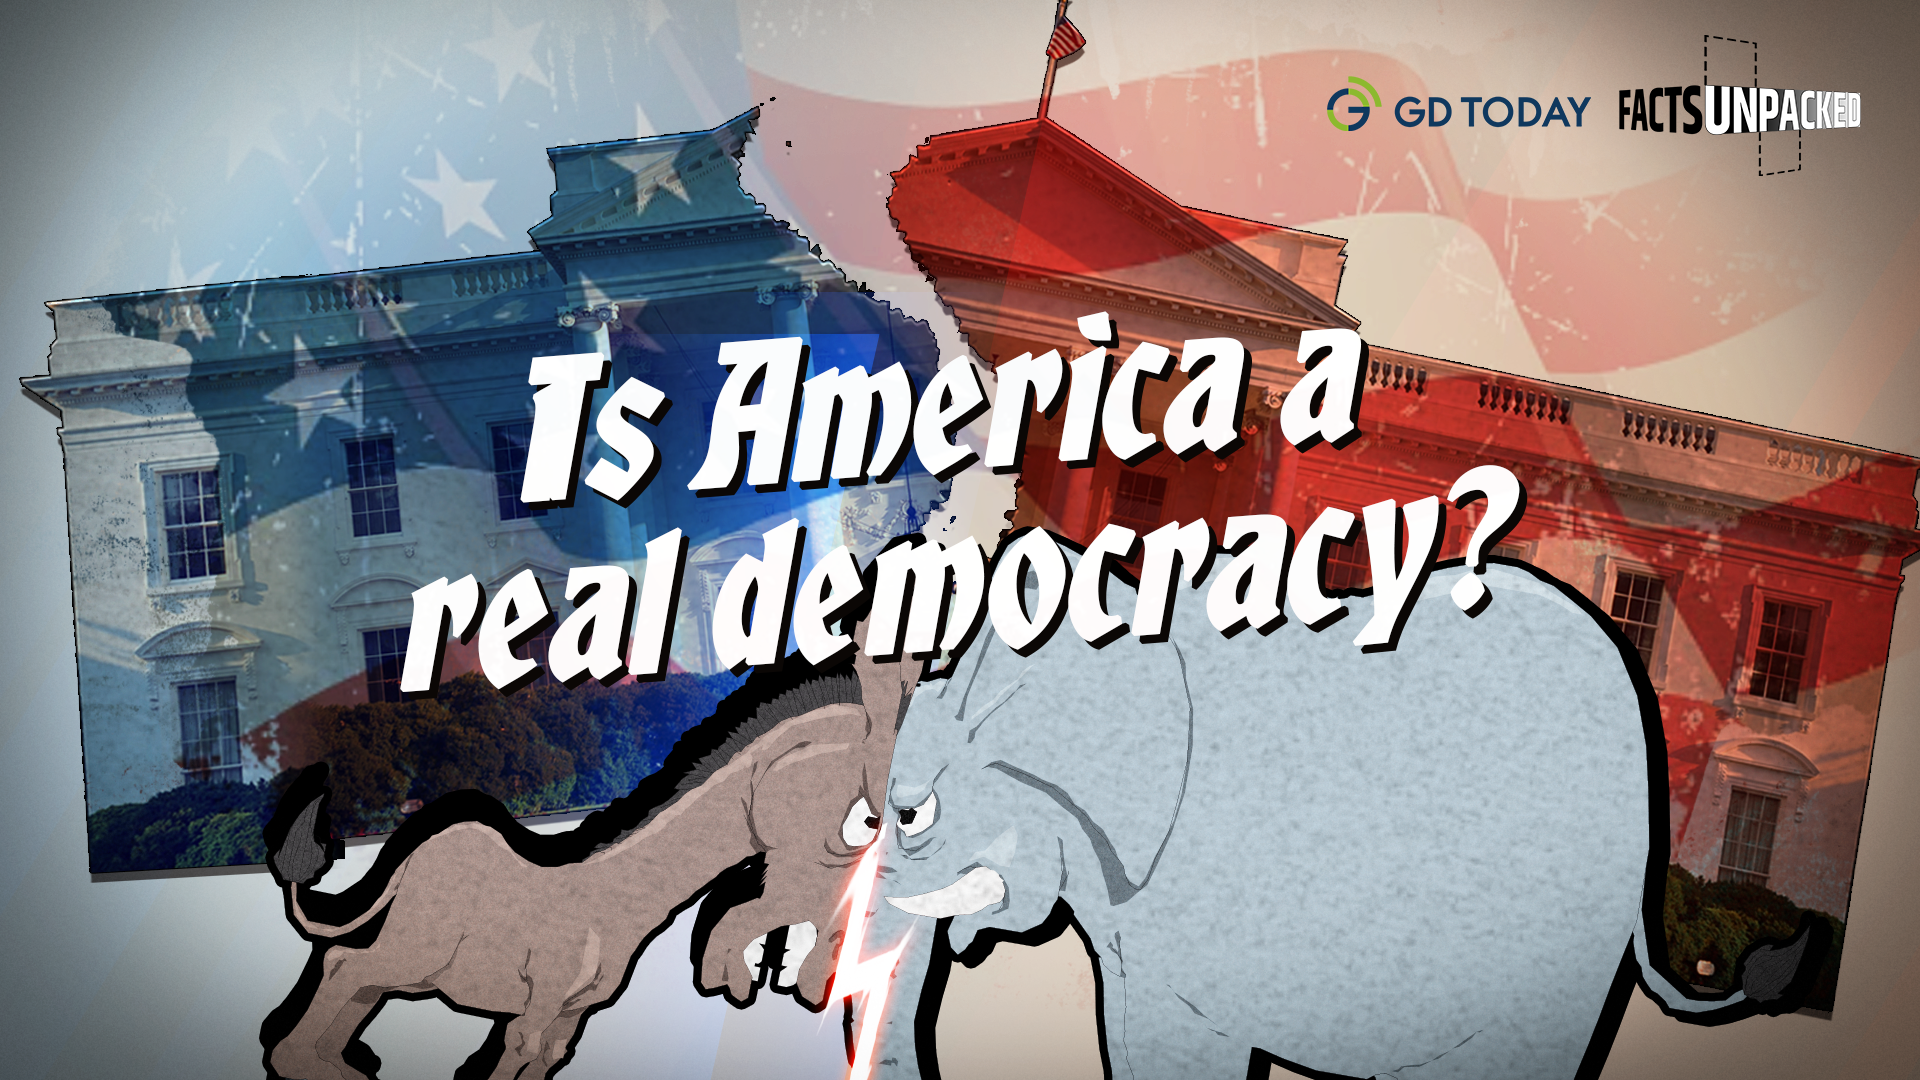 Facts Unpacked | What are the scars and secrets behind the US's flawed democracy?